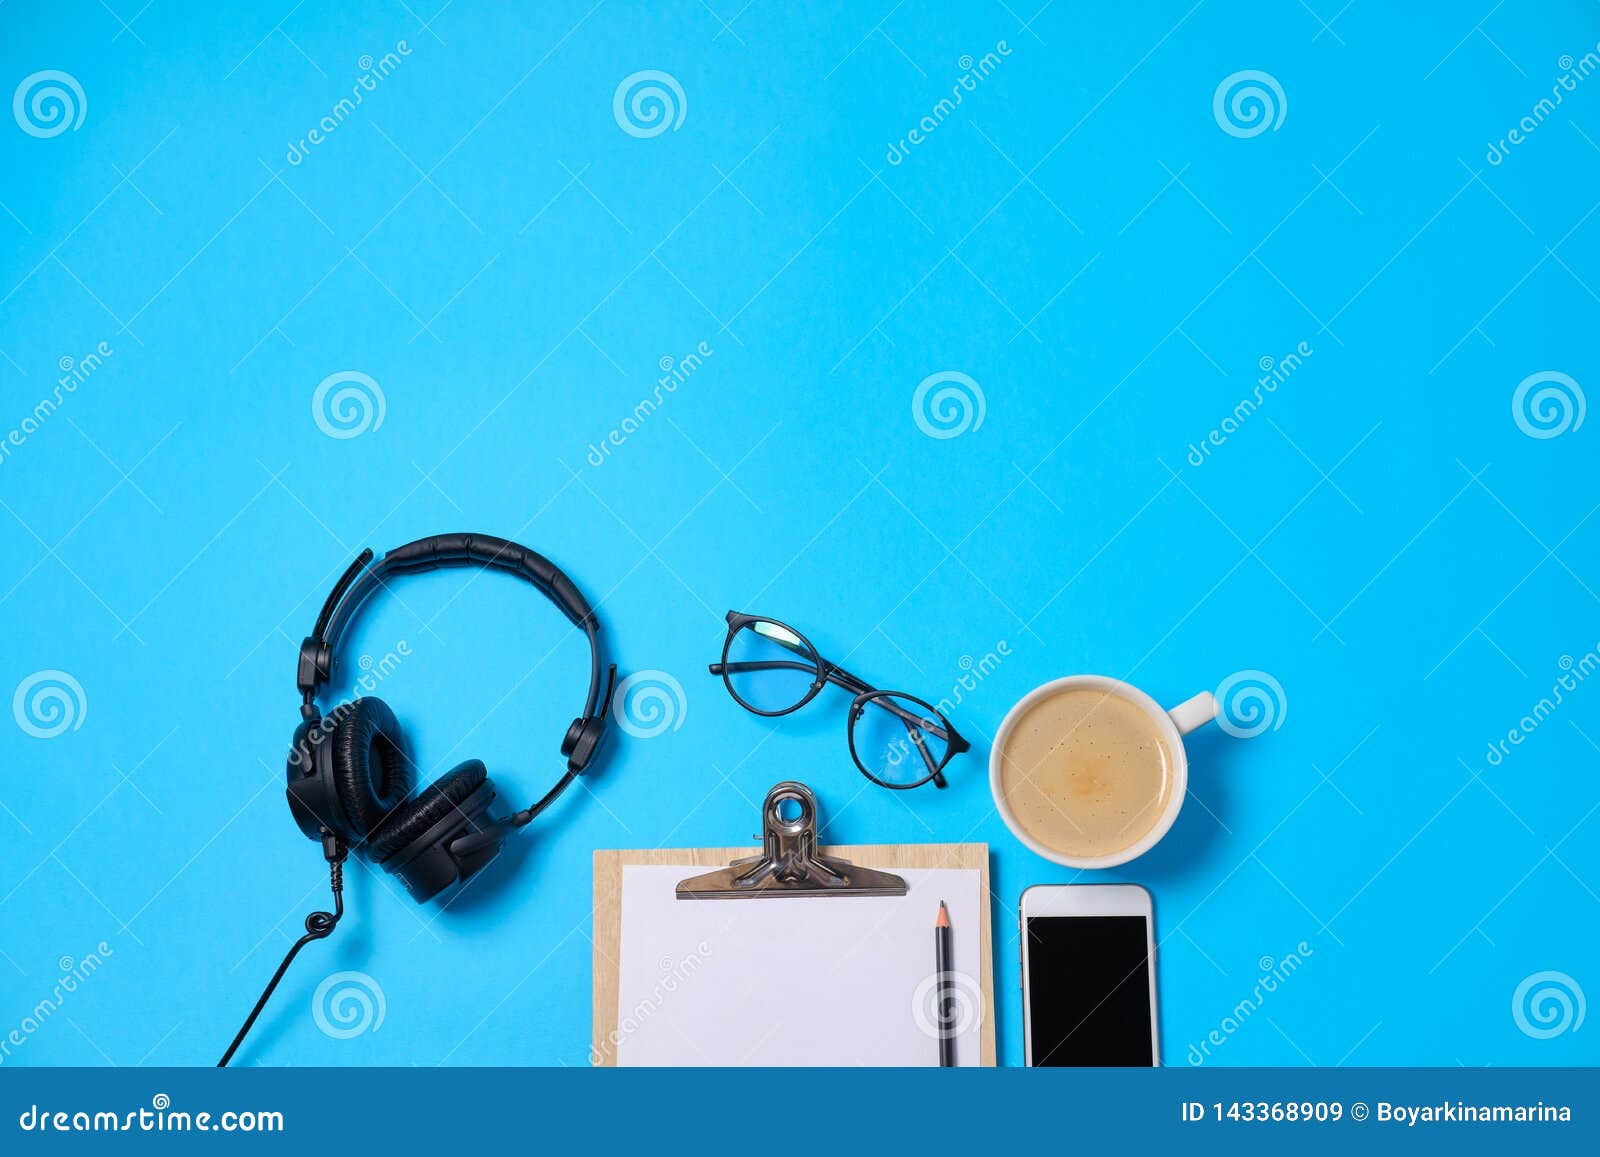 Music or Podcast Background with Headphones, Microphone, Coffee and Blank  on Blue Table, Flat Lay. Top View, Flat Lay Stock Image - Image of listen,  digital: 143368909